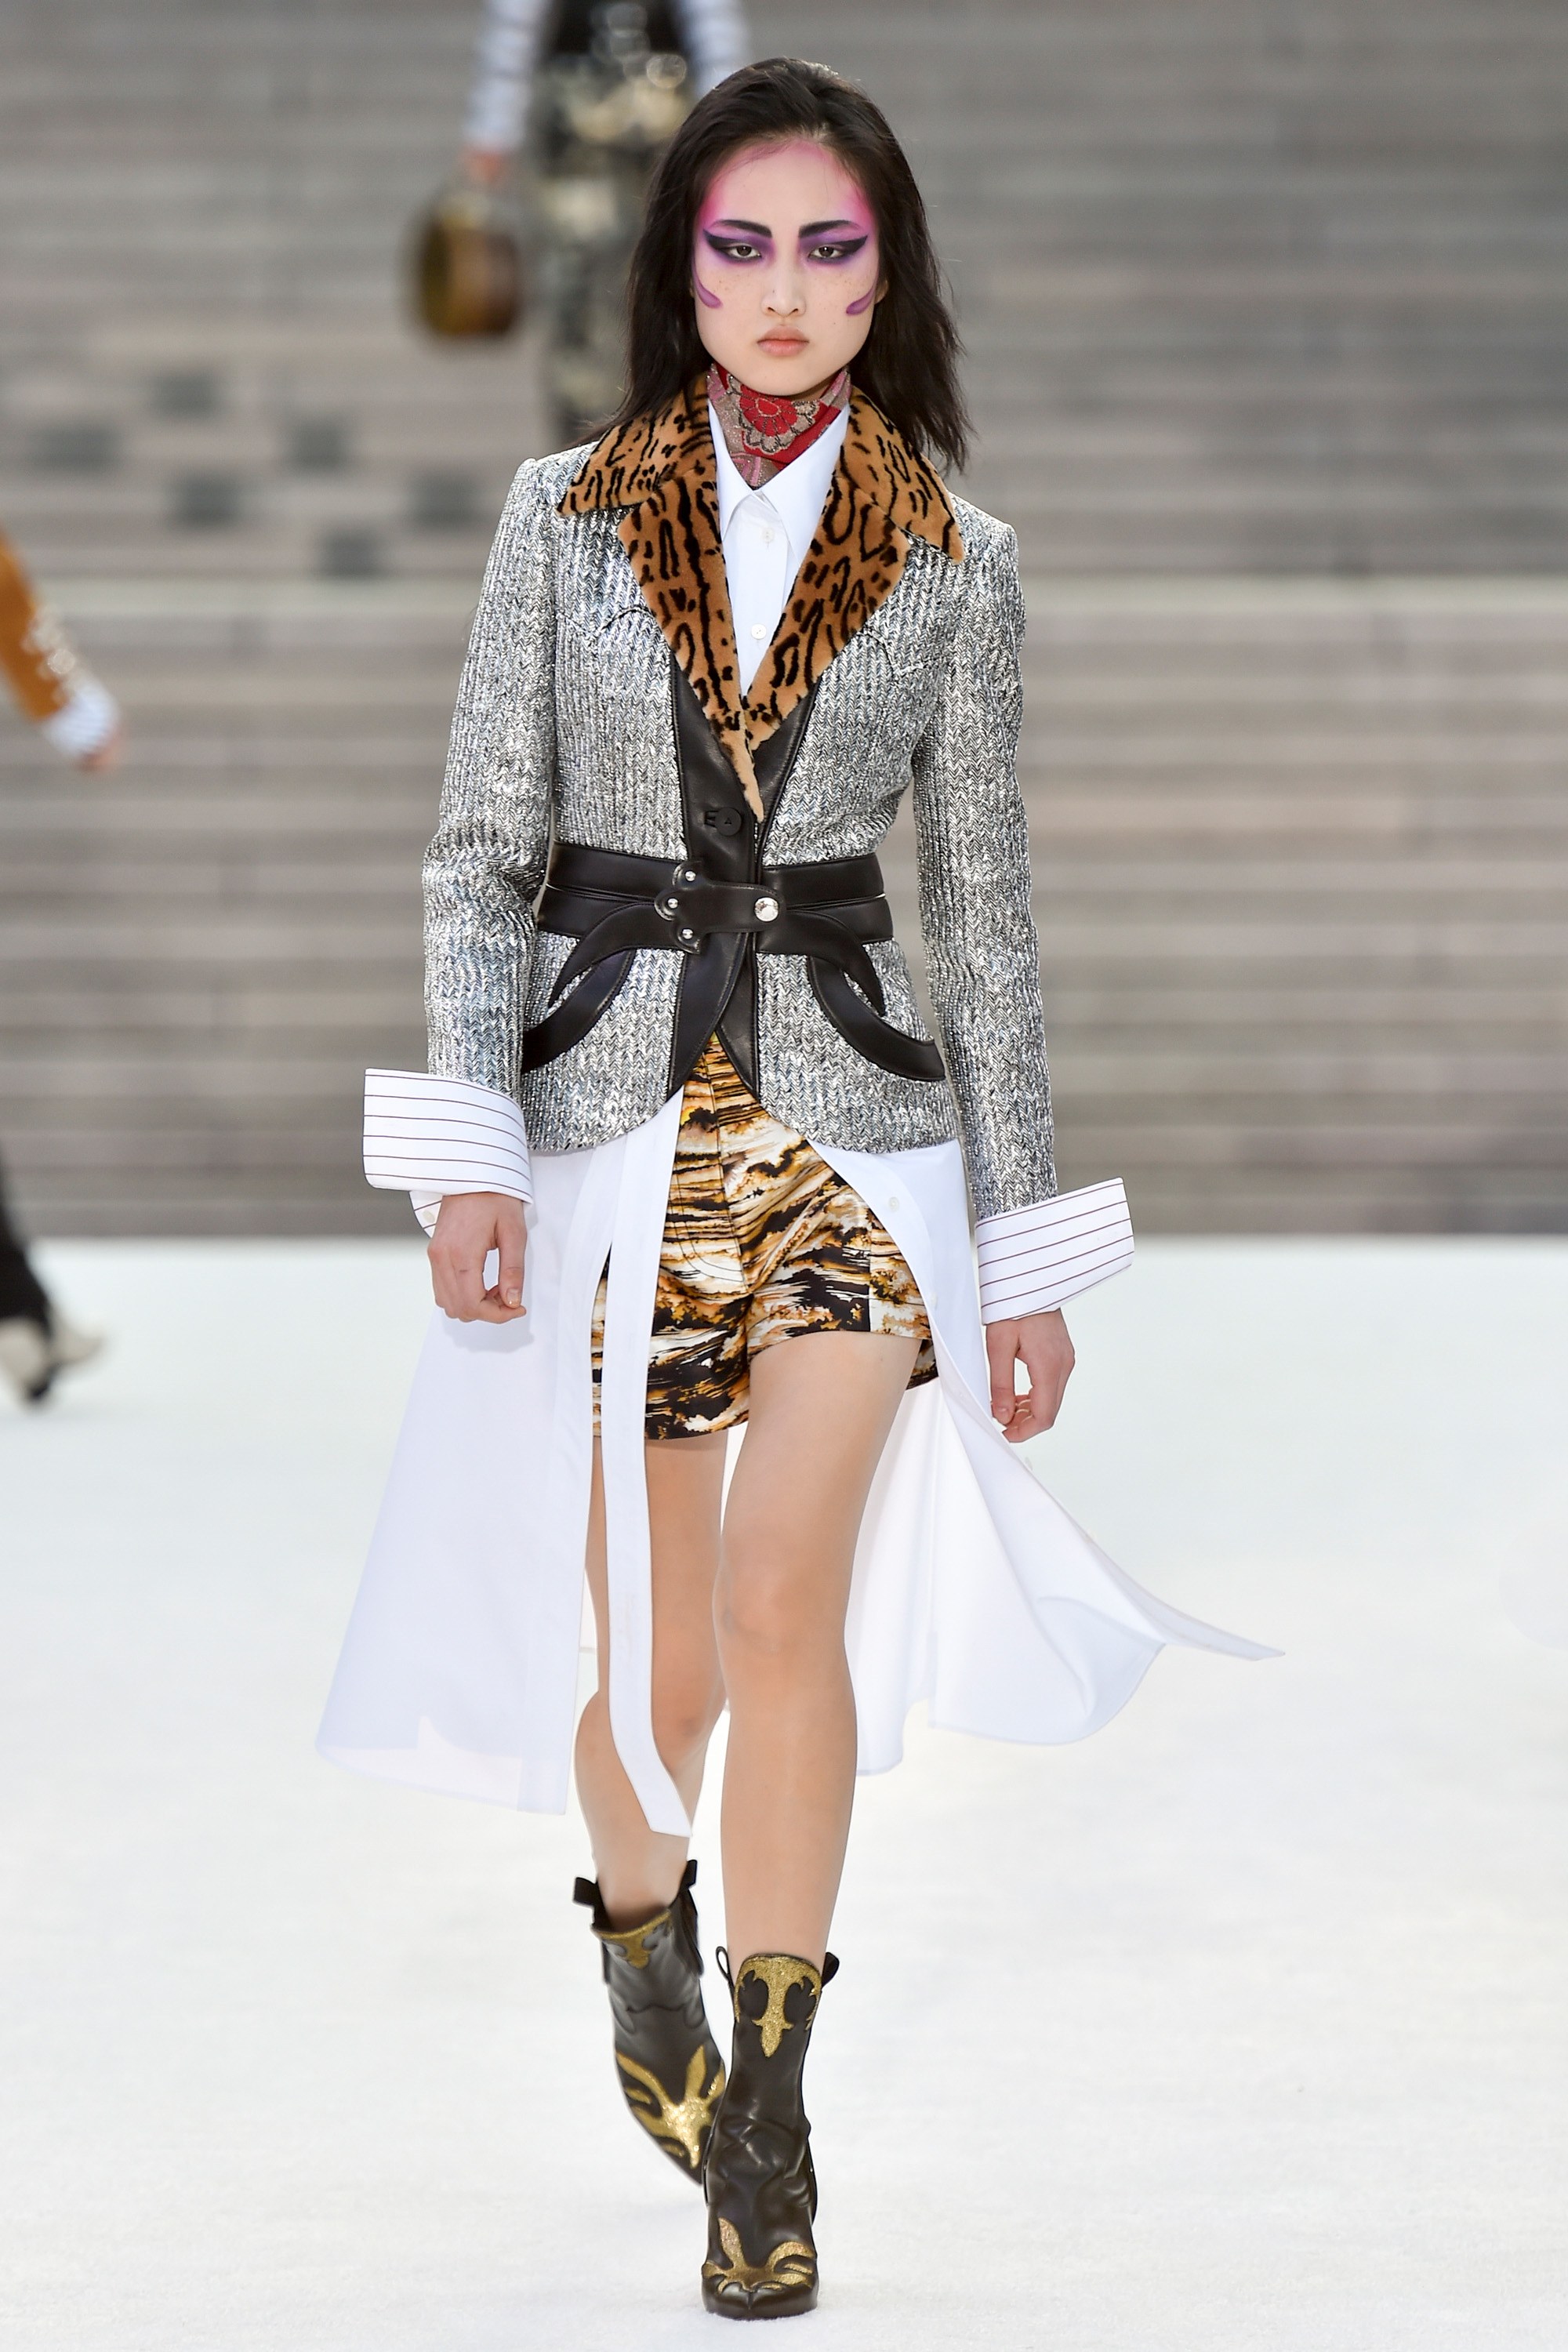 Photo #1a003 from Louis Vuitton Cruise 2018